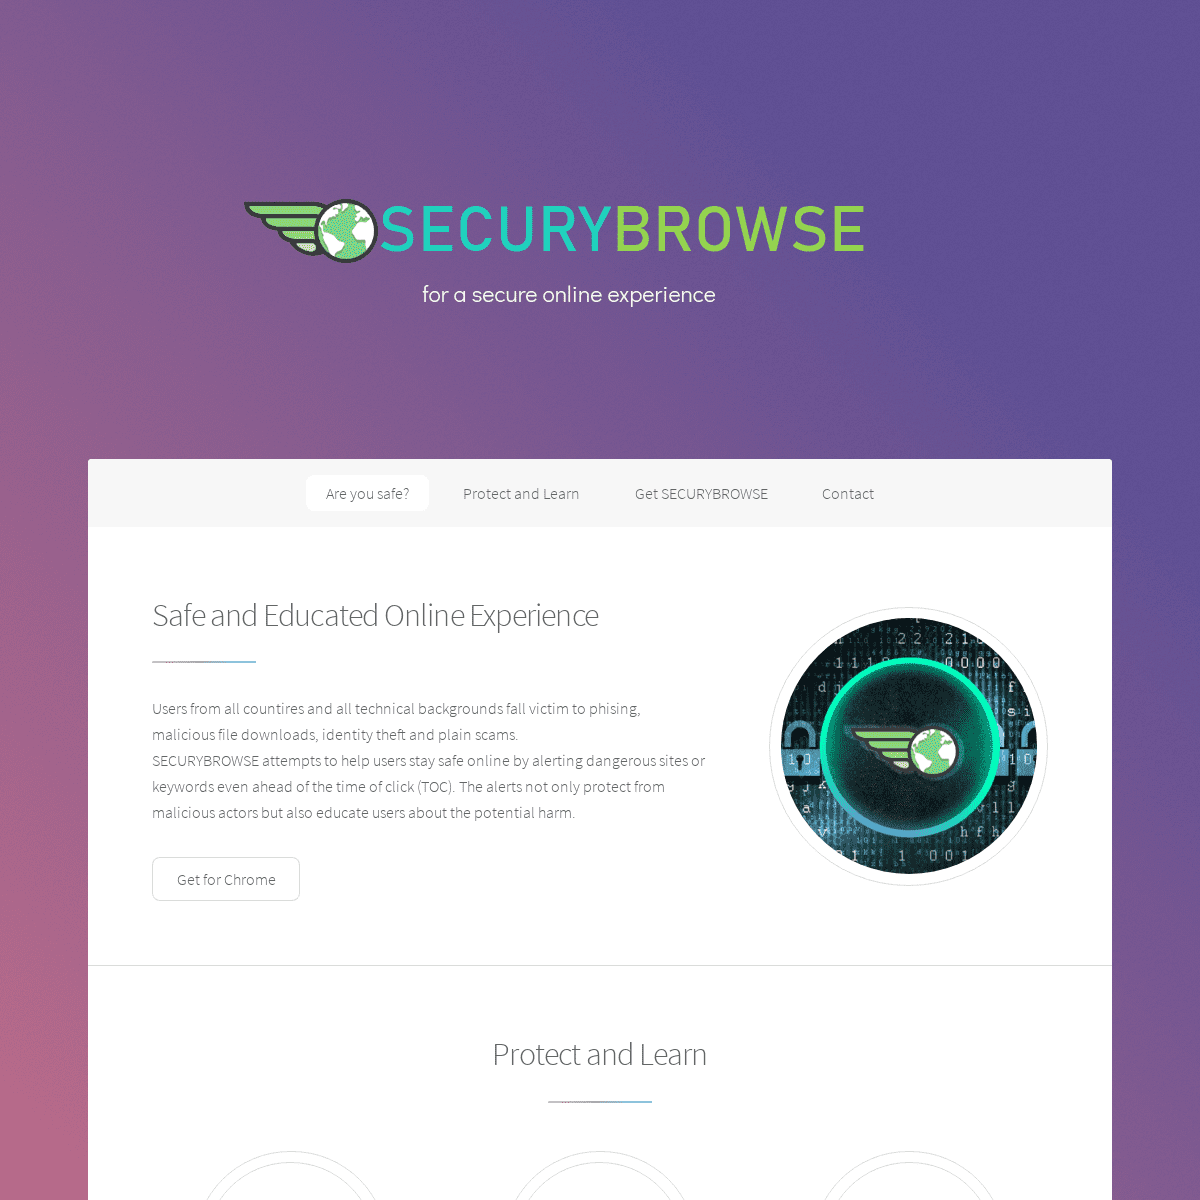 A complete backup of securybrowse.com